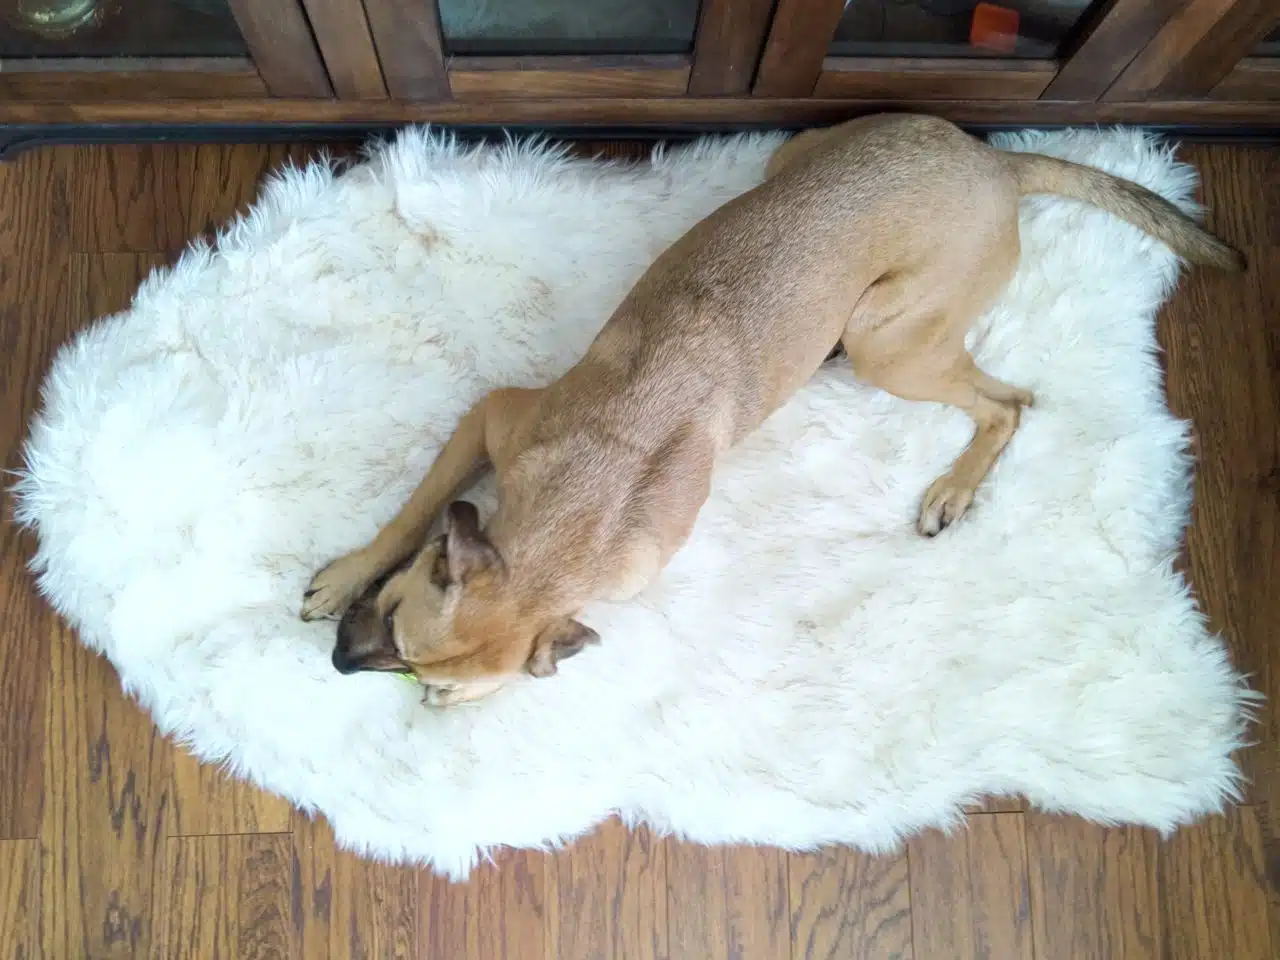 Treat A Dog: PupRug Bed